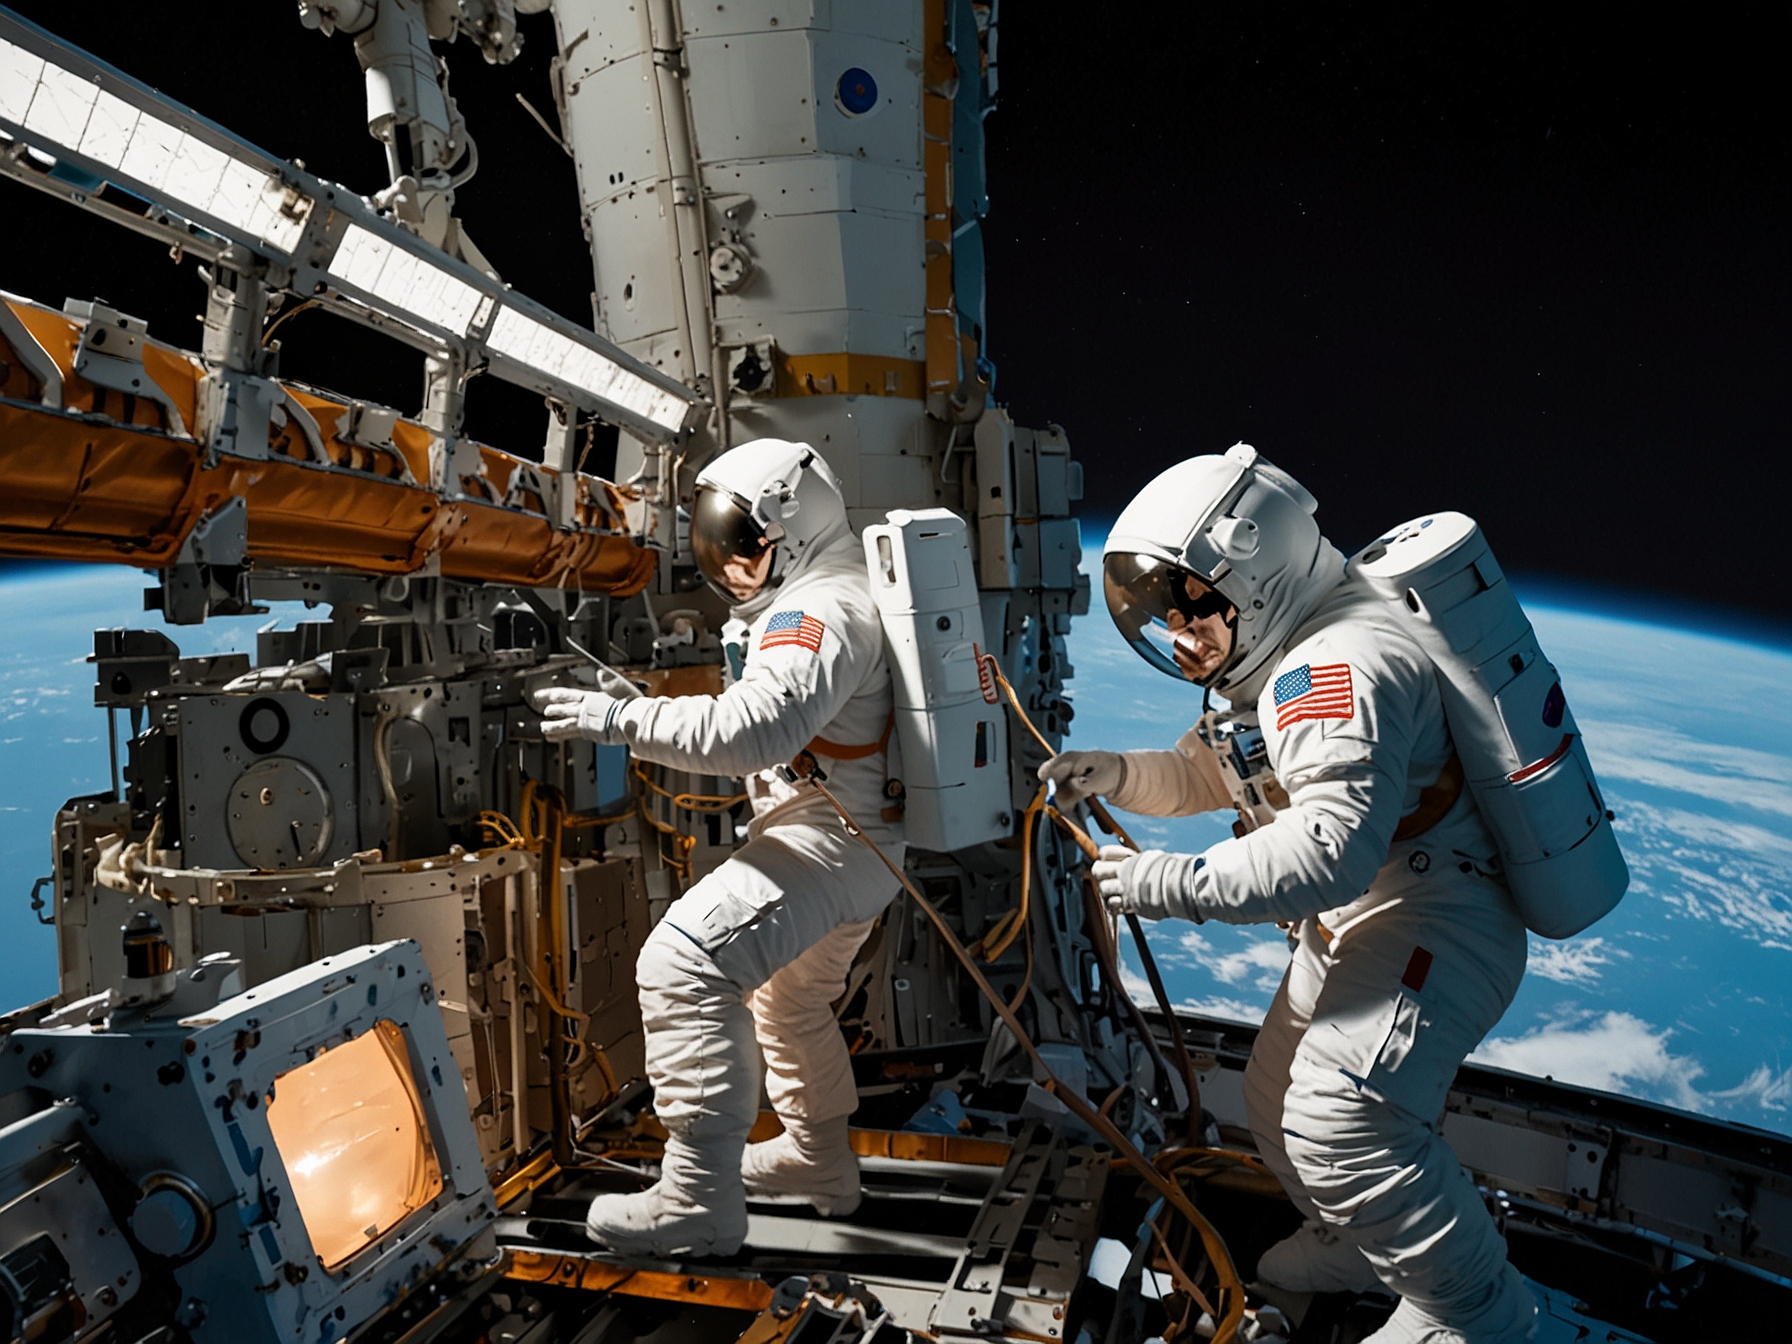 An image showing NASA astronauts aboard the ISS, working closely with ground engineers to troubleshoot the Boeing Starliner's propulsion system issues.